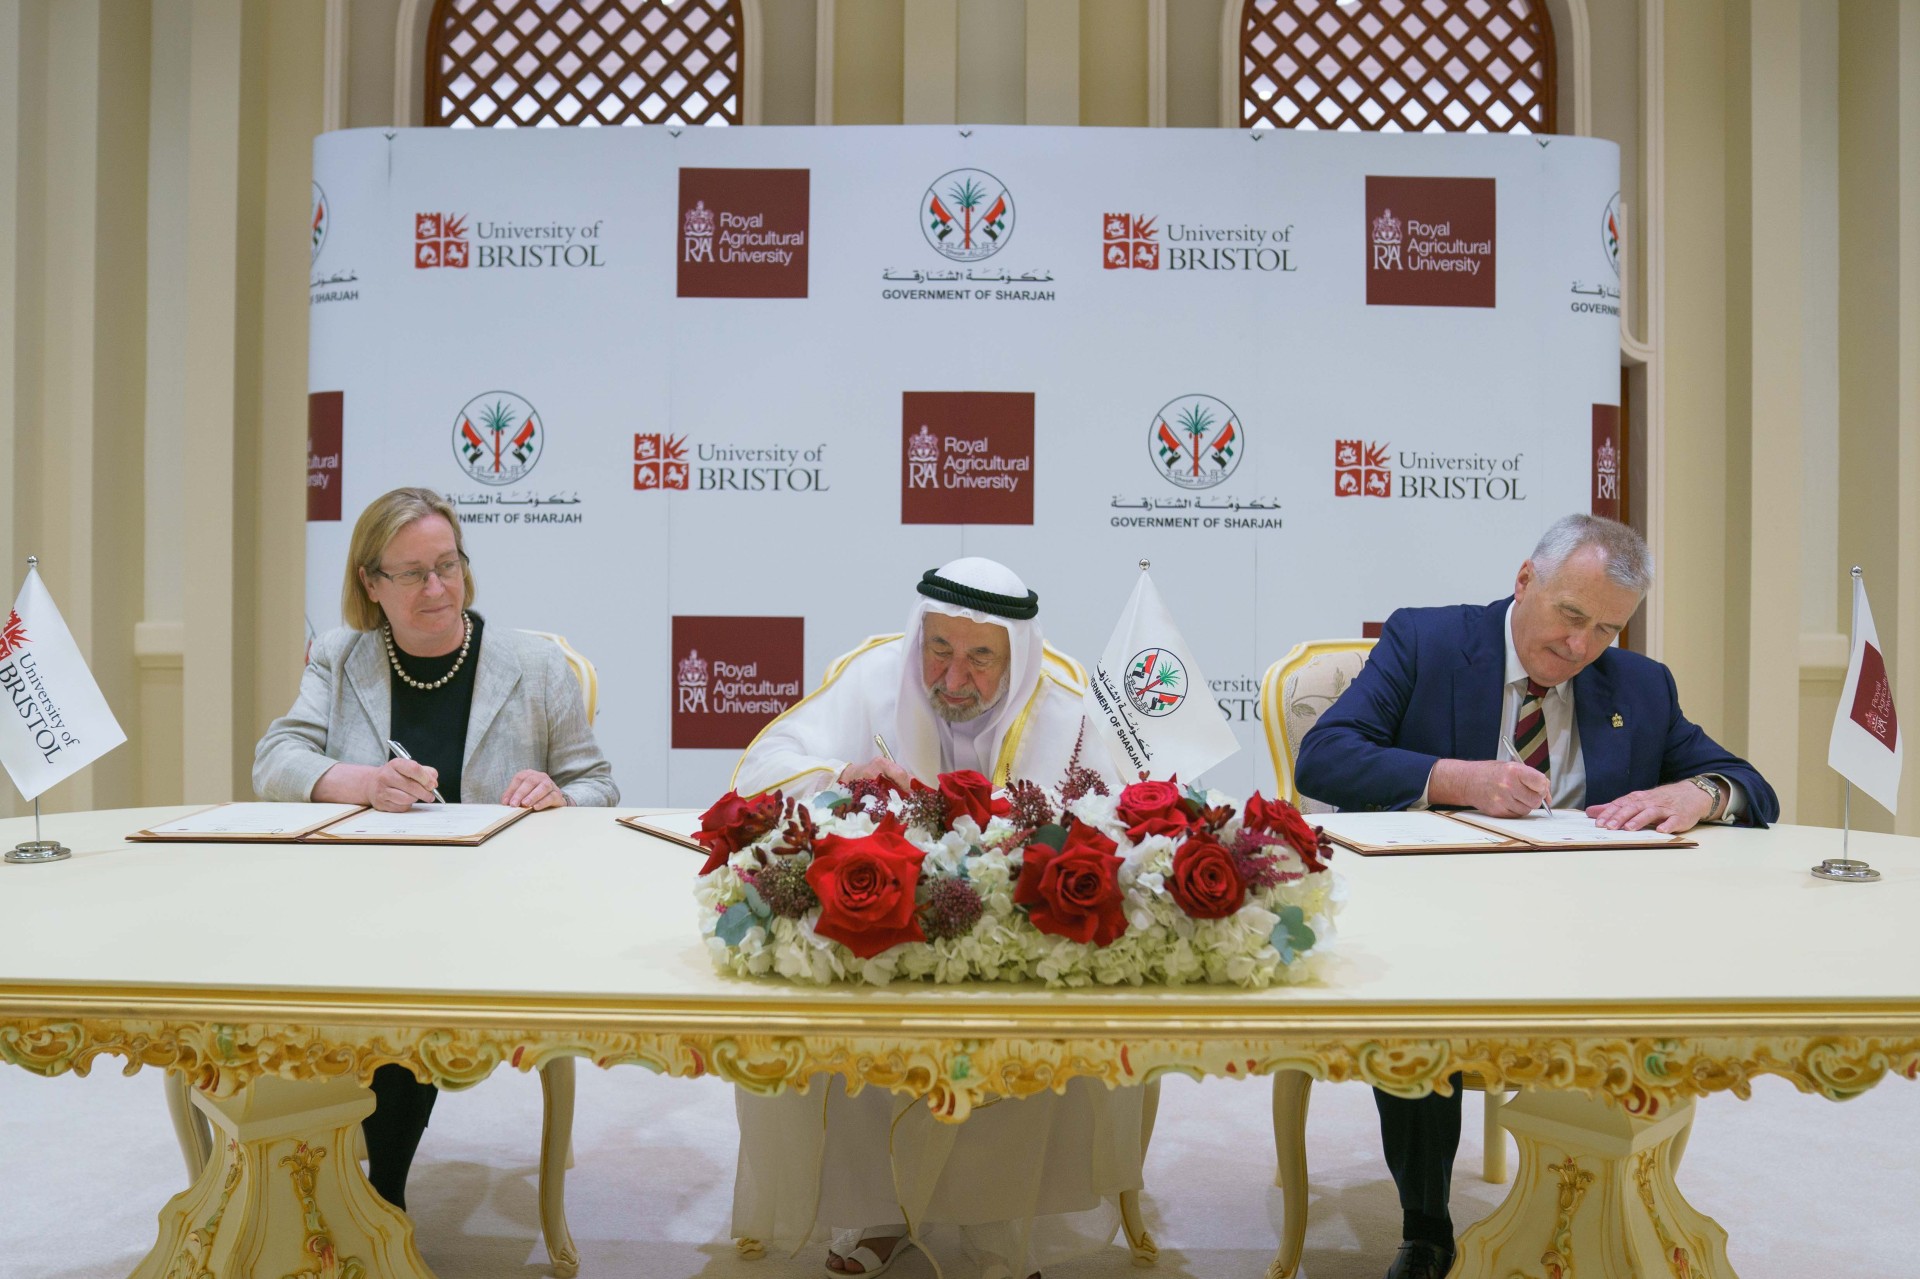 Left to right - Professor Evelyn Welch (Vice-Chancellor and President of the University of Bristol), His Highness Sheikh Dr Sultan bin Muhammad Al Qasimi and Professor Peter McCaffery (Vice-Chancellor at the Royal Agricultural University) signing the Memorandum of Understanding this week in Sharjah